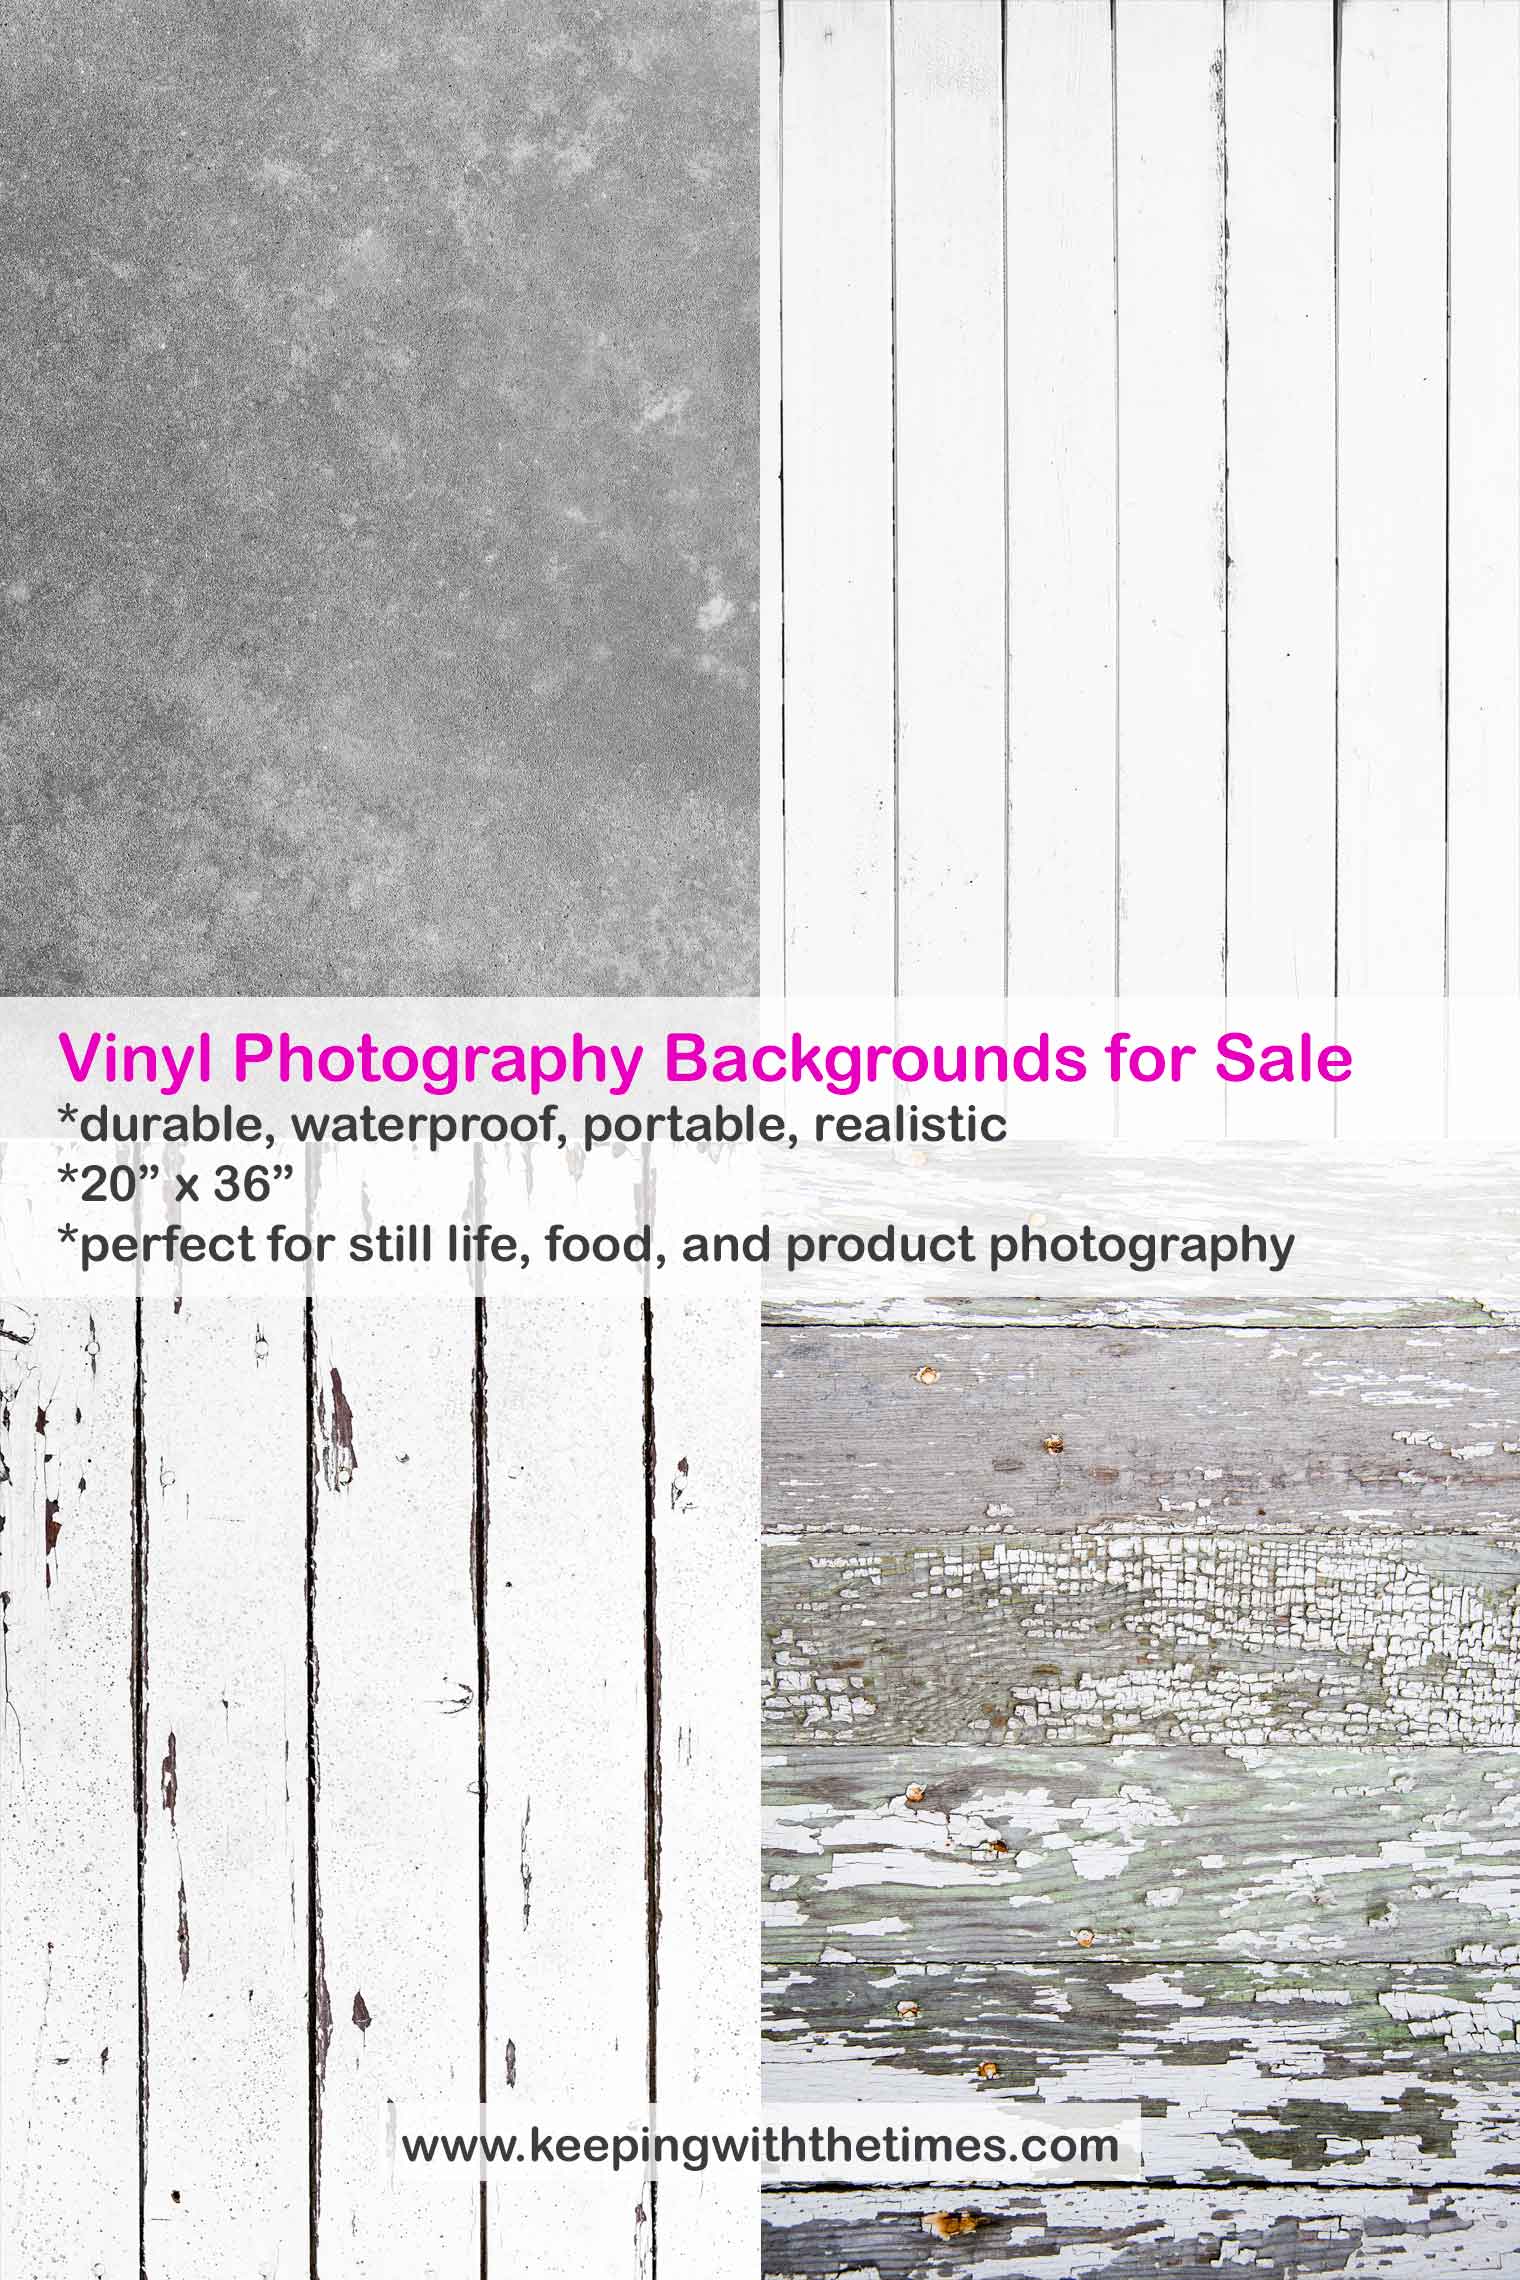 Vinyl Photography Backgrounds for sale. Durable, waterproof, portable, and realistic. Keeping With the Times dot com